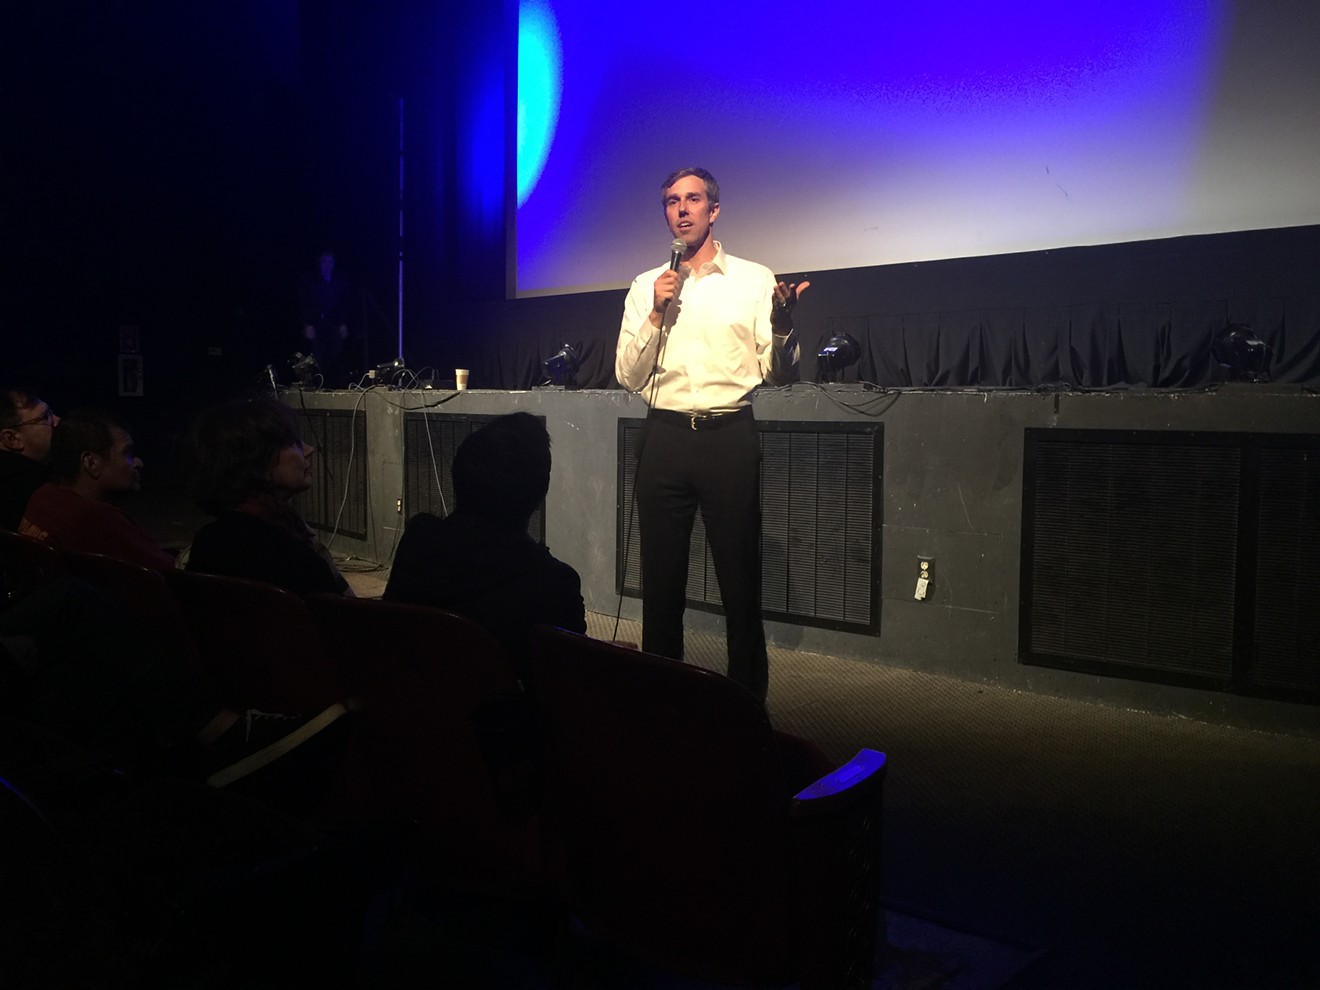 U.S. Rep. Beto O'Rourke met with a packed house for a town hall Friday night at the Texas Theatre in Oak Cliff.